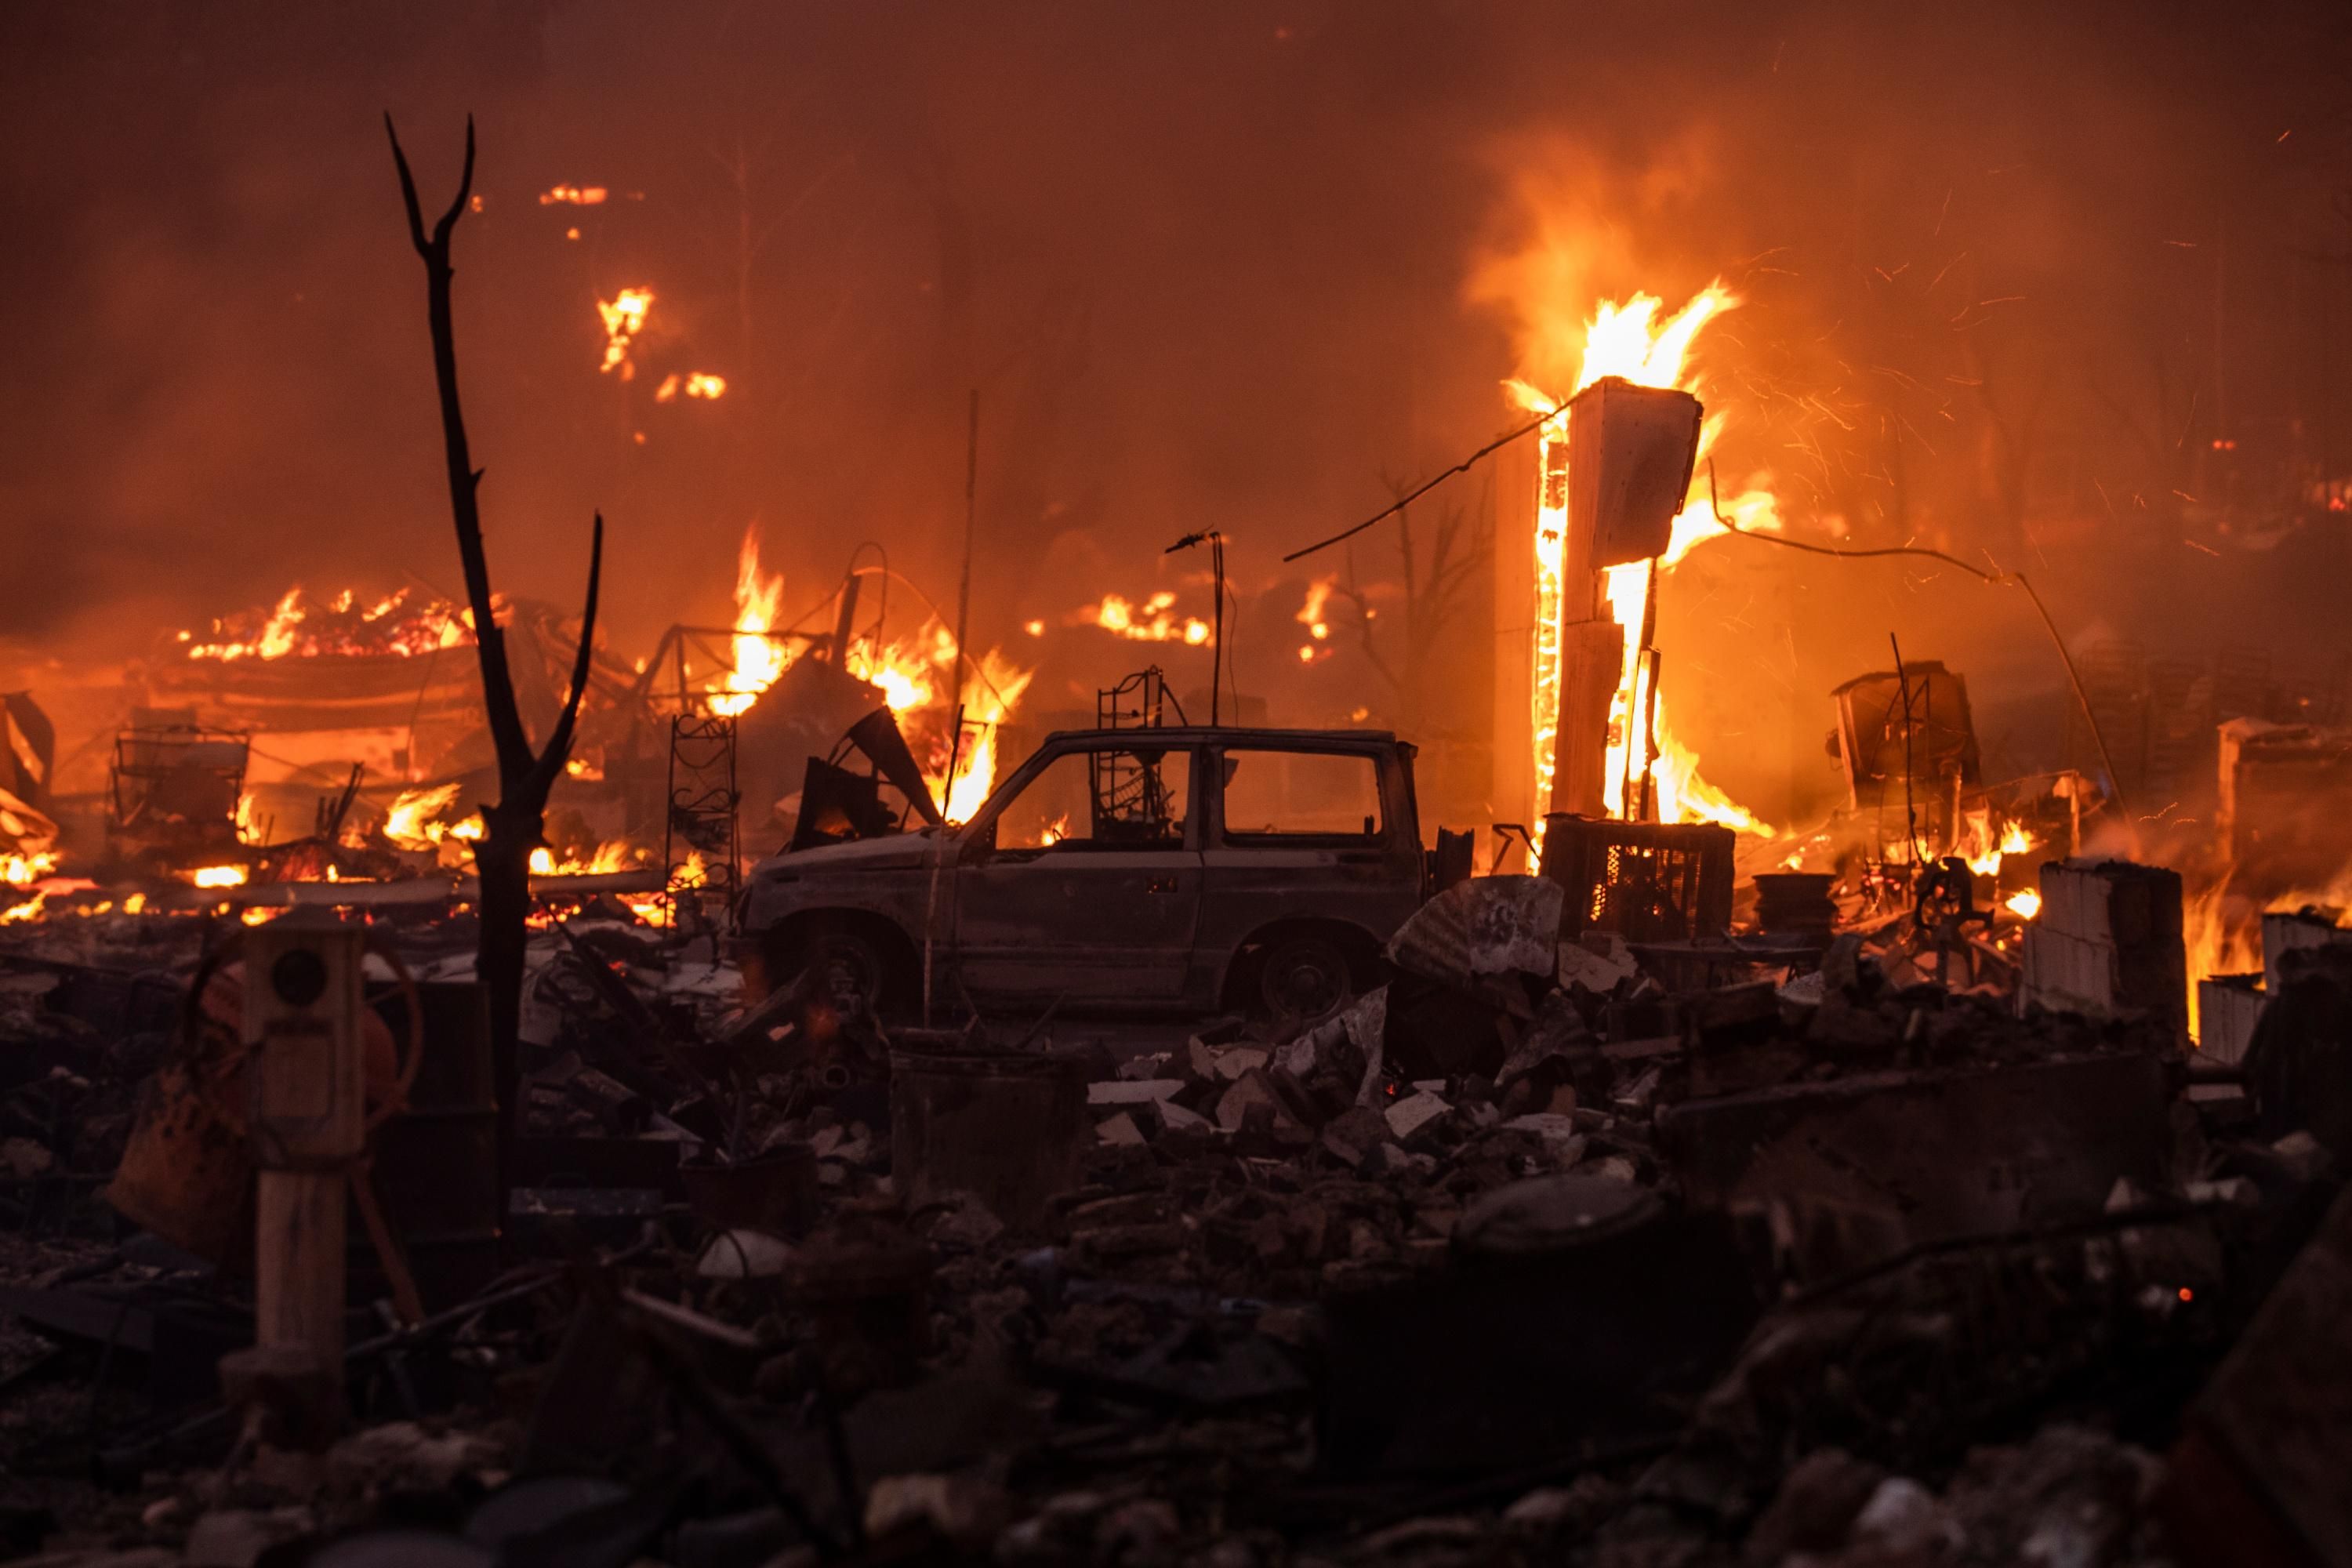  A damaged vehicle stands amongst burning structures during the Dixie Fire in Greenville, California